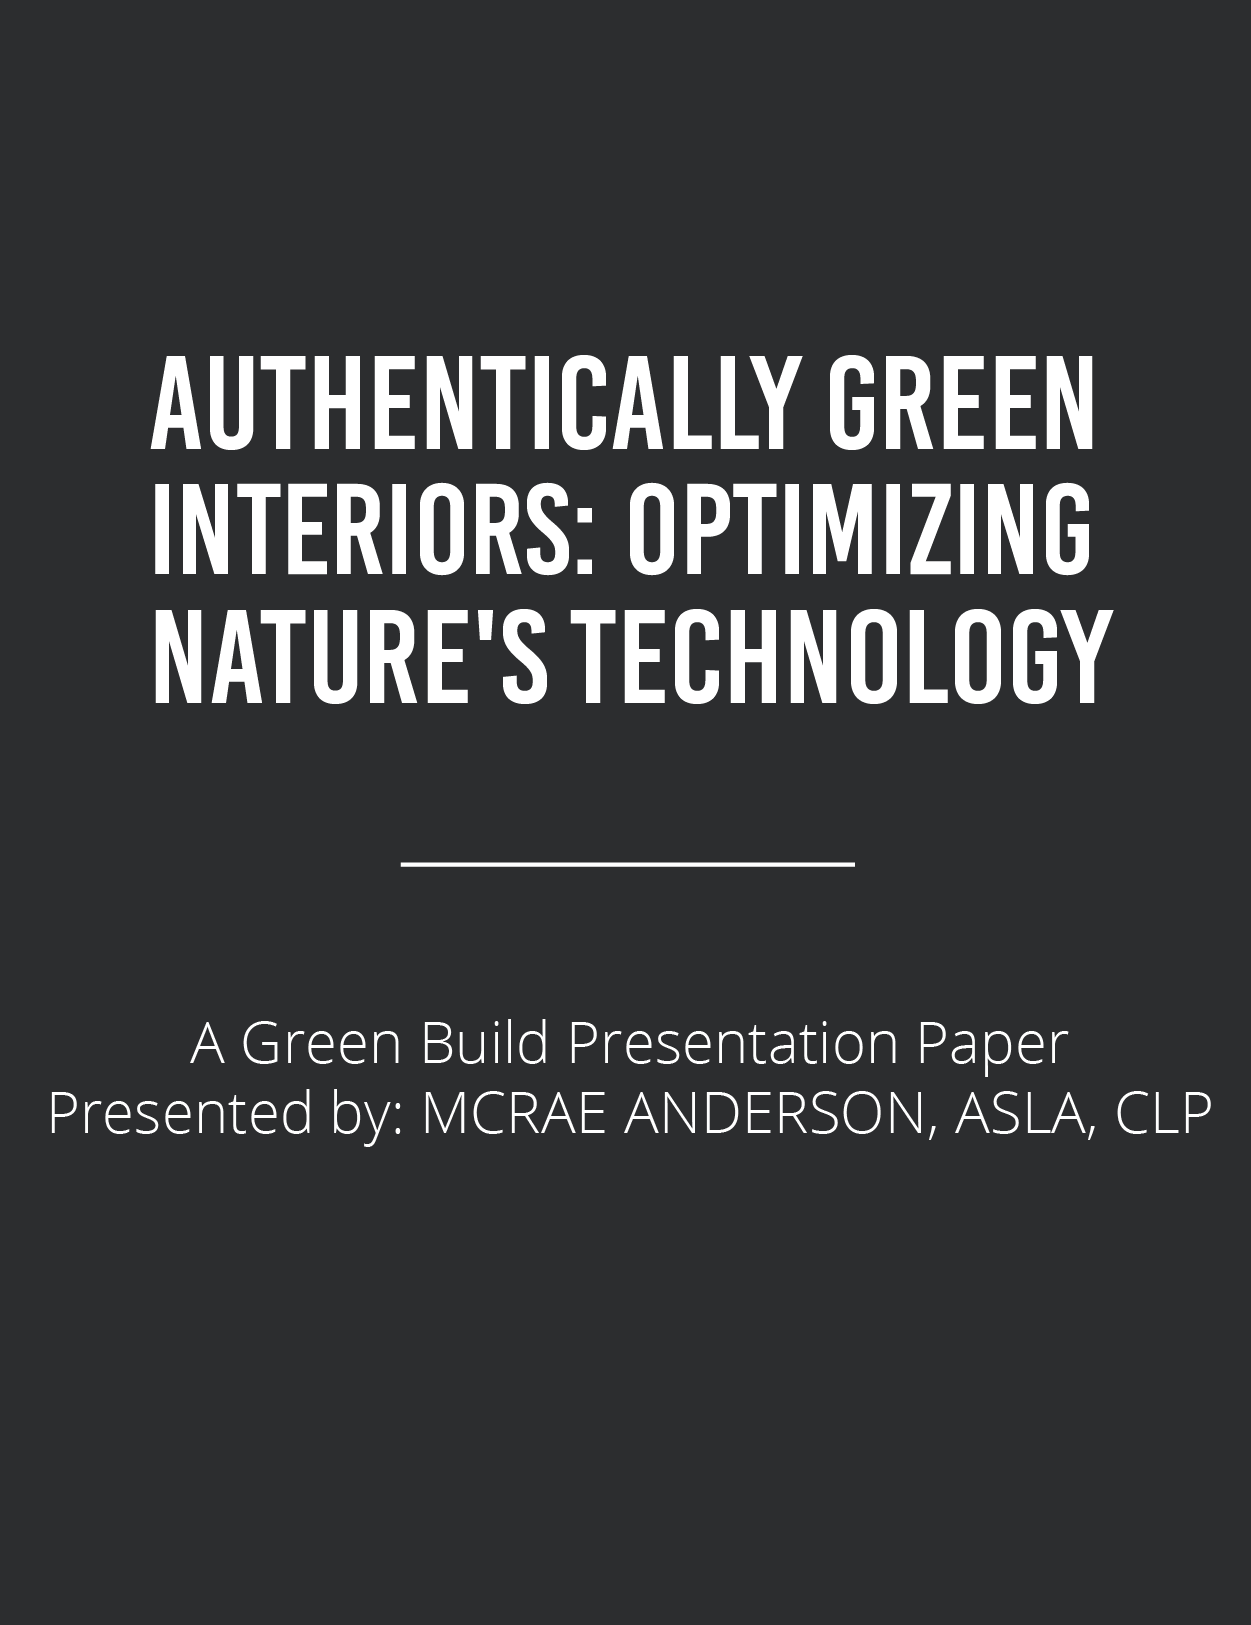 Authentically Green InteriorsFeatured Image